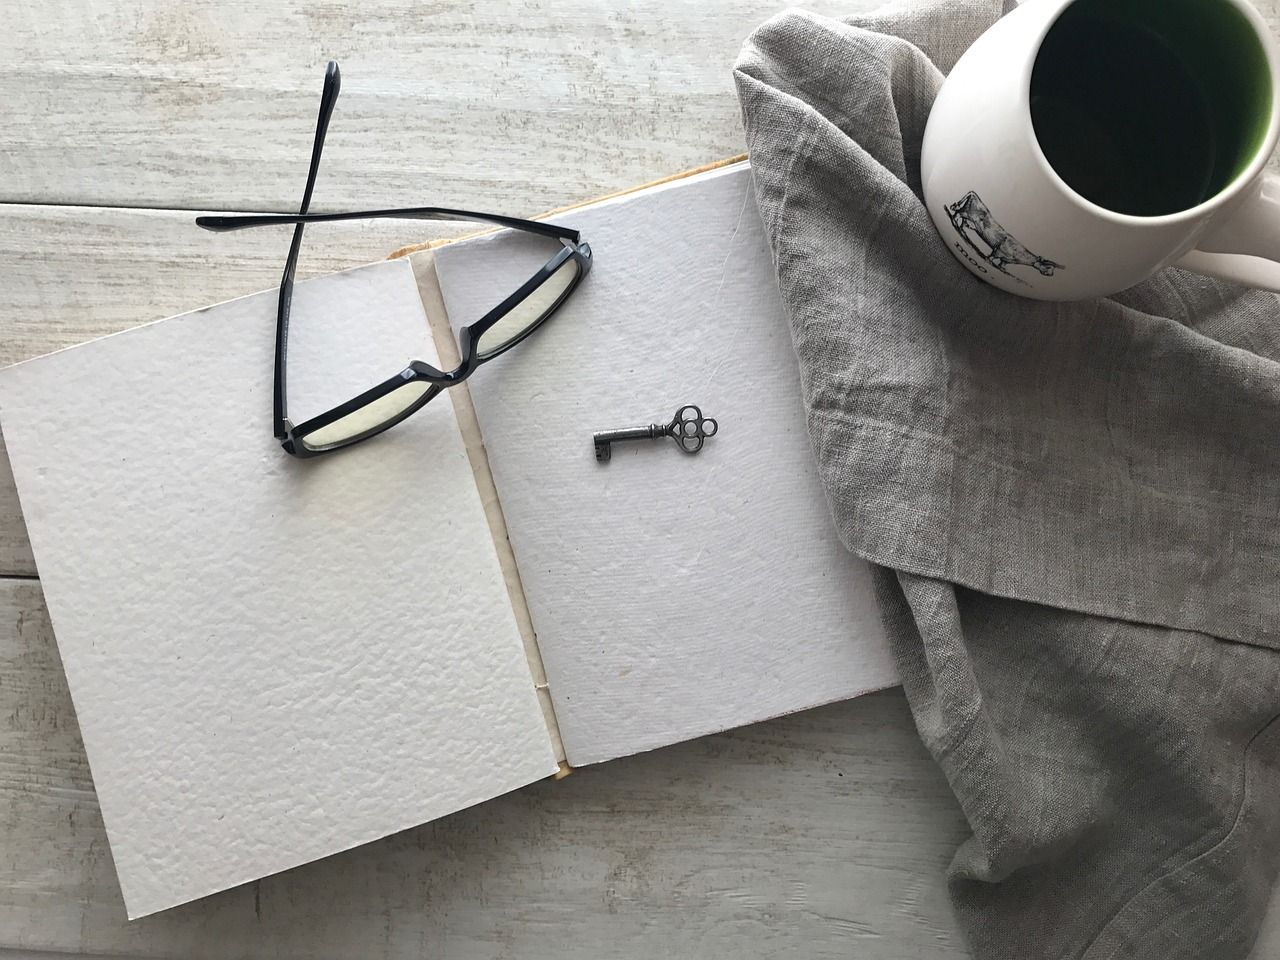 Open notebook with glasses and vintage key on top, beside a mug a of coffee